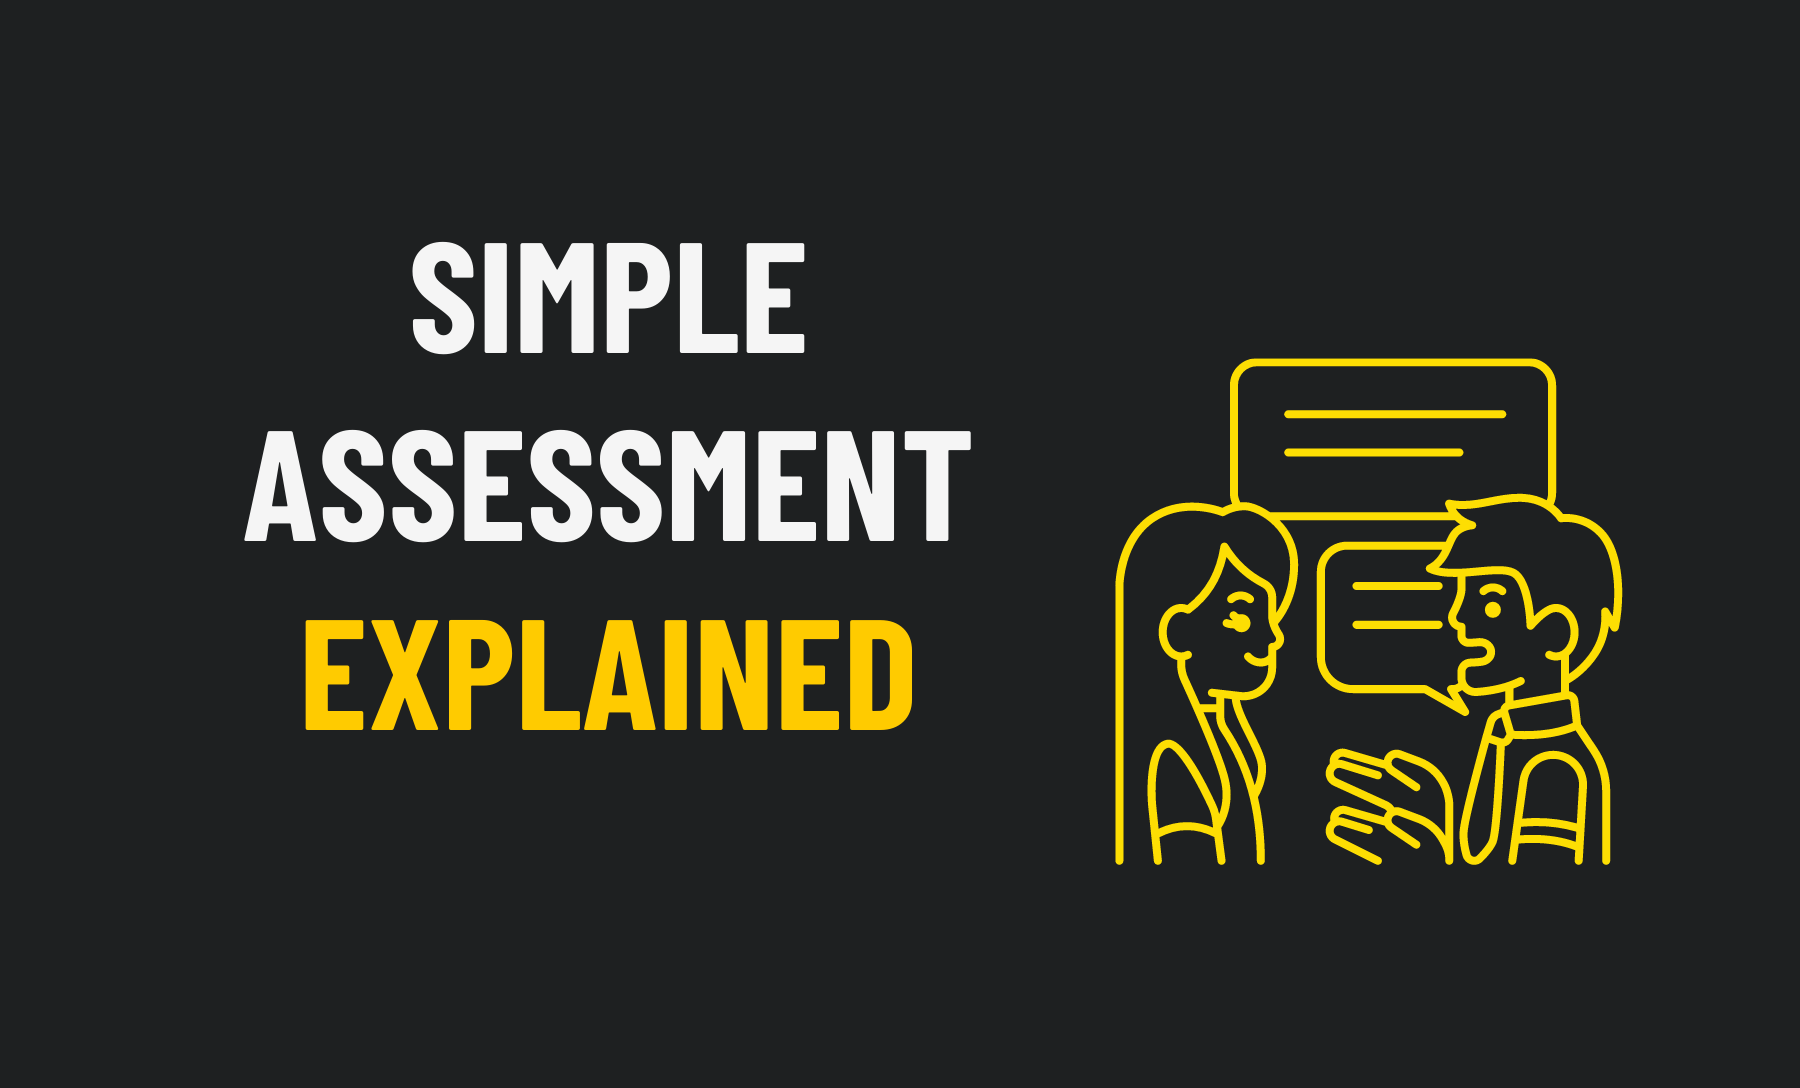 Simple Assessment Explained